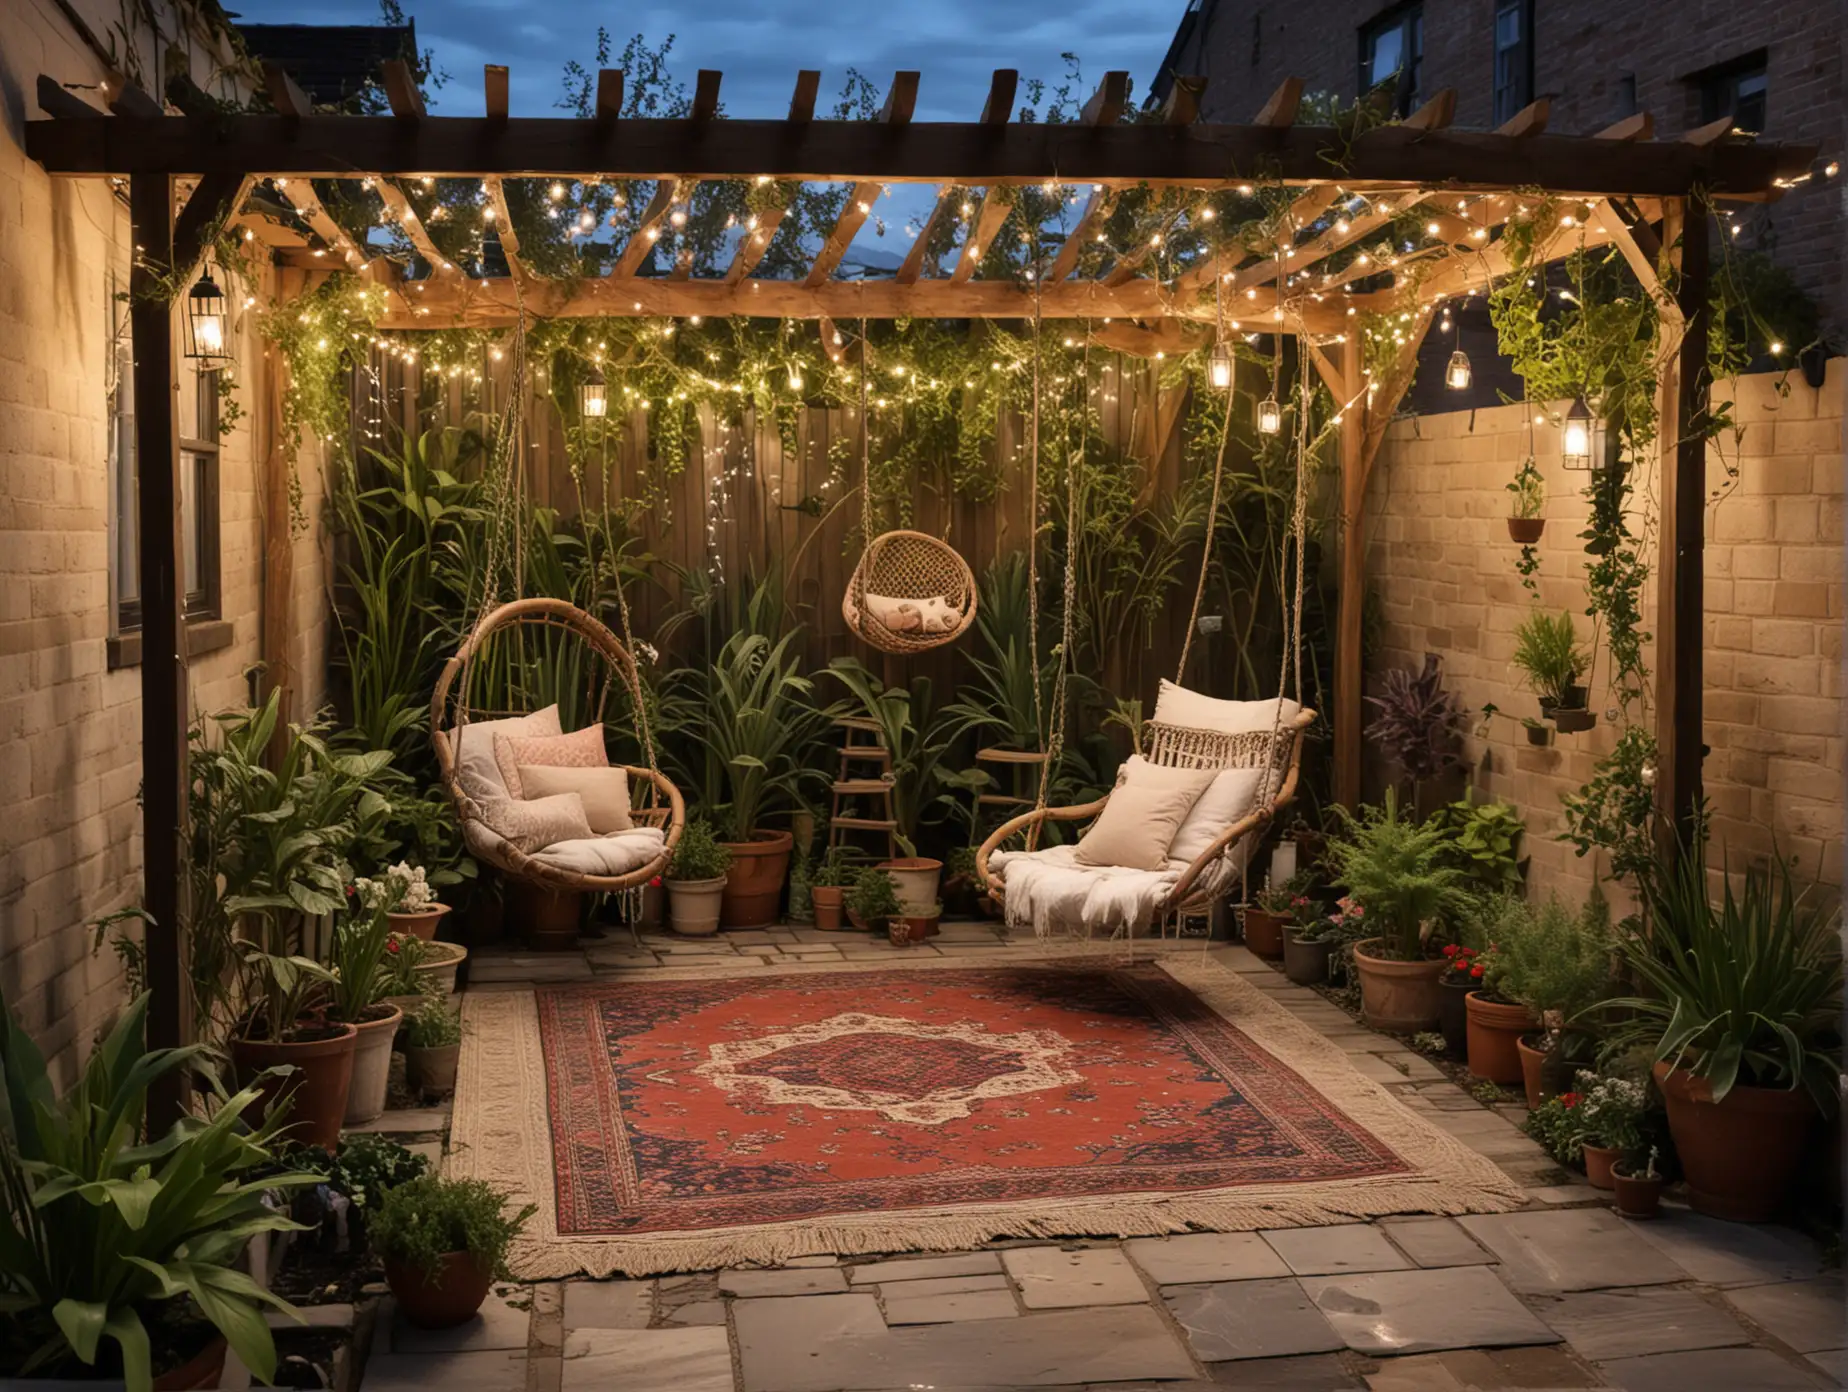 A rustic patio with a wooden pergola, hanging swing chair, and a small garden pond. The space is decorated with fairy lights, outdoor rugs, and various potted plants.